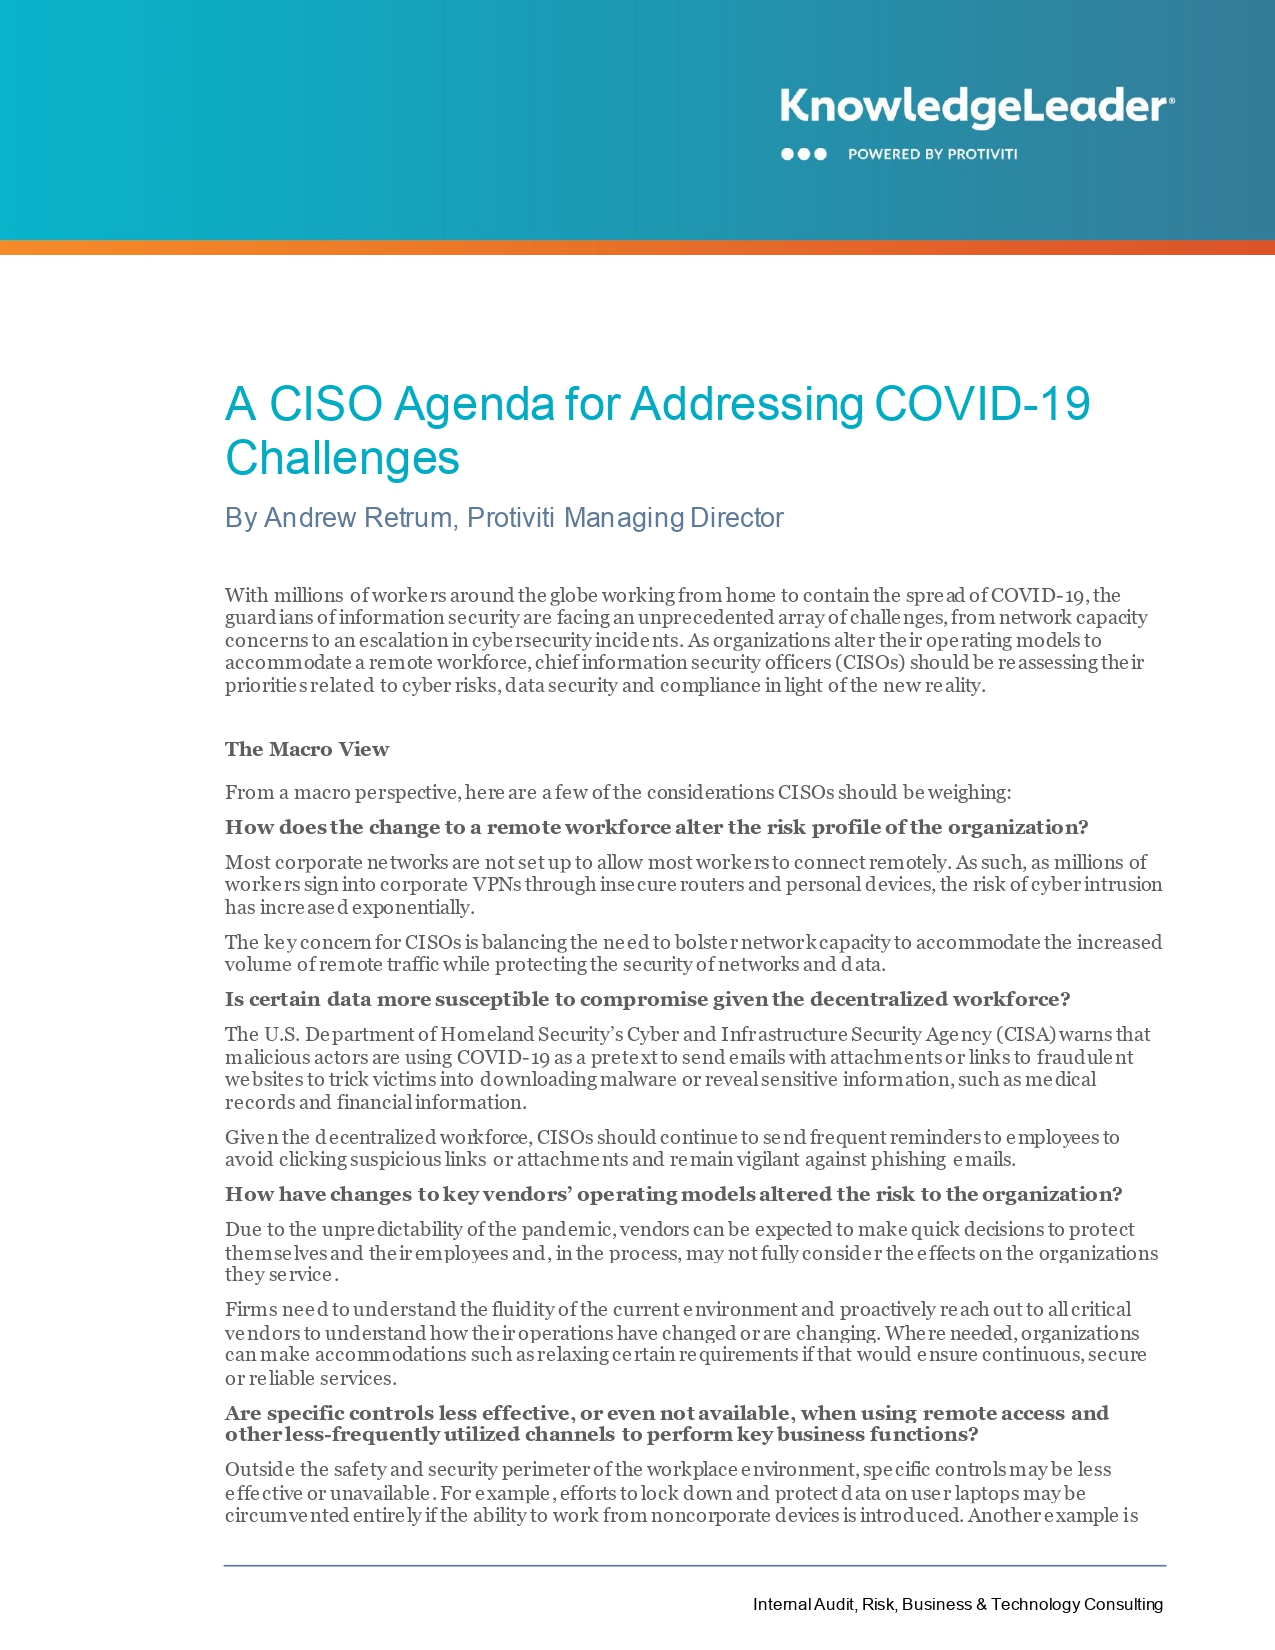  A CISO Agenda for Addressing COVID-19 Challenges